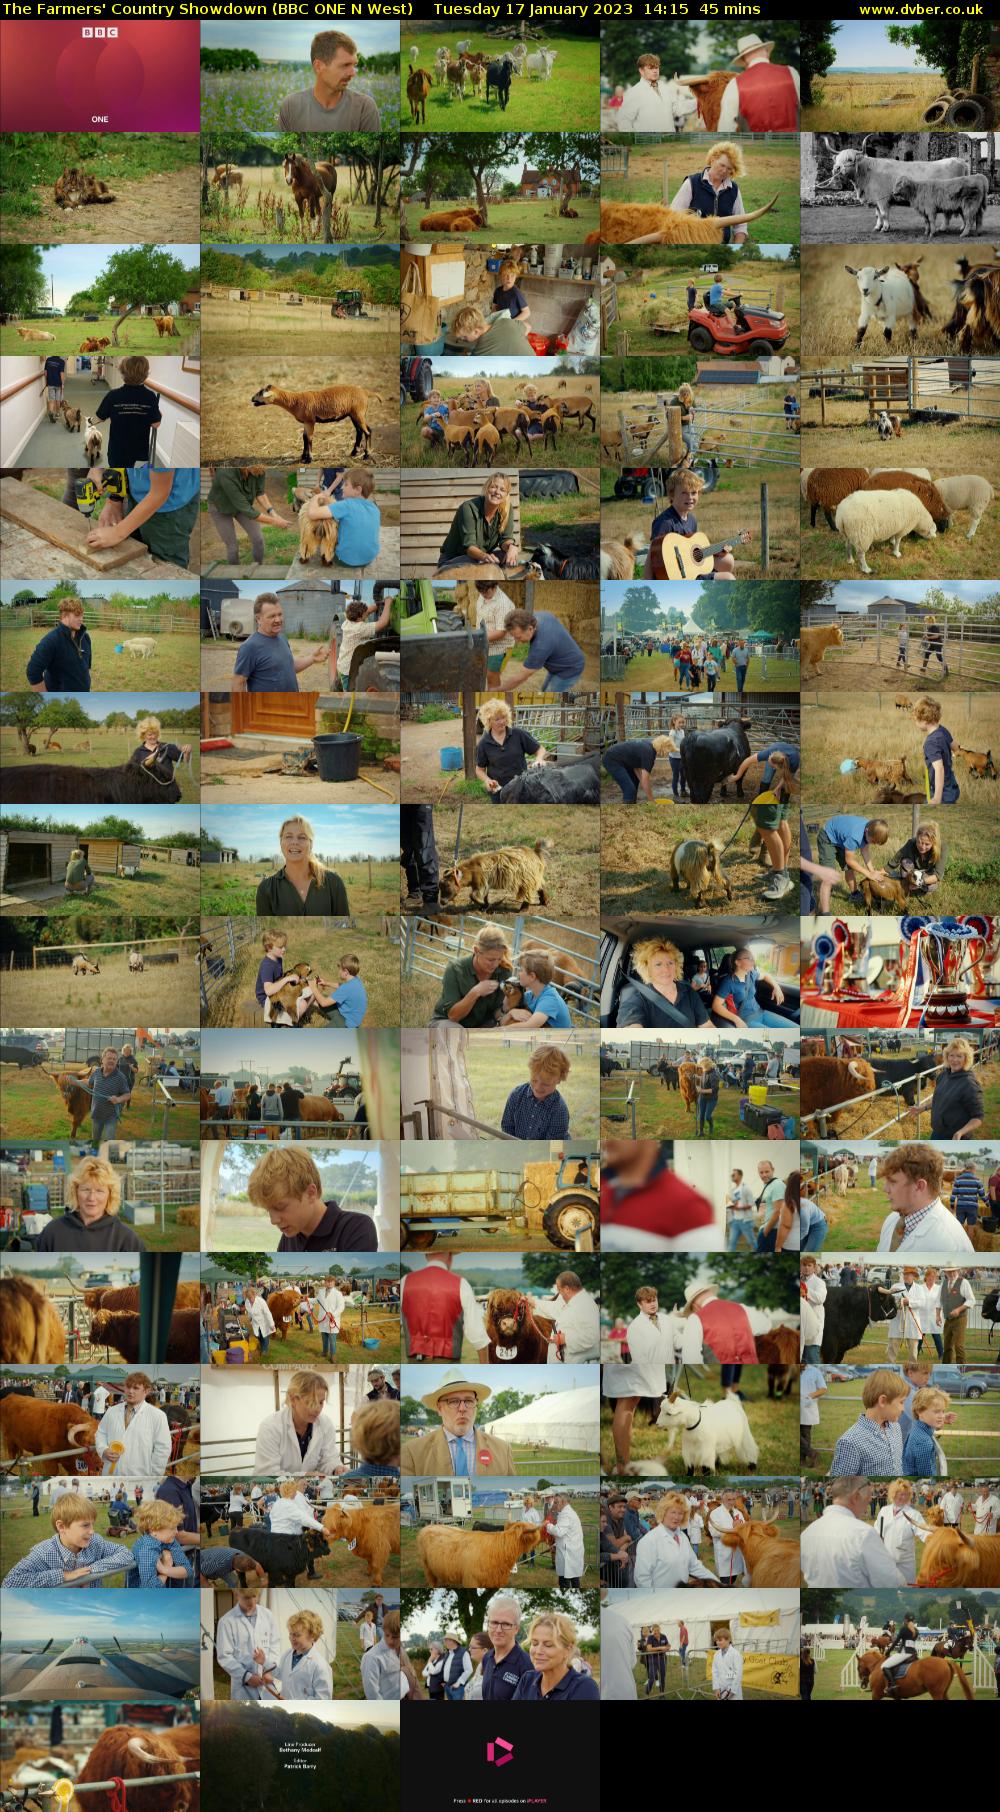 The Farmers' Country Showdown (BBC ONE N West) Tuesday 17 January 2023 14:15 - 15:00